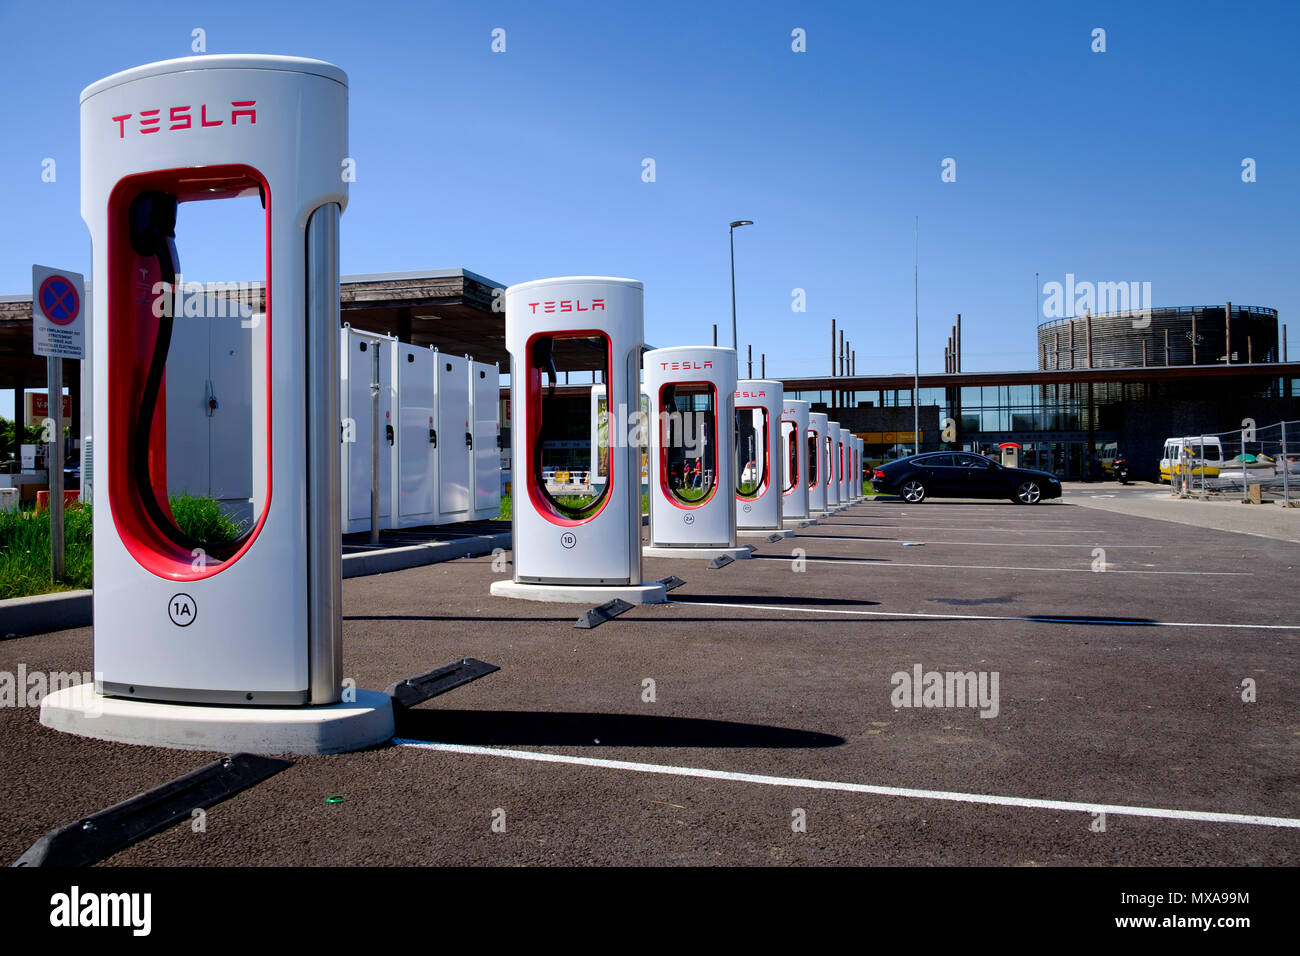 Tesla multi electric car charging points at French service station Stock Photo